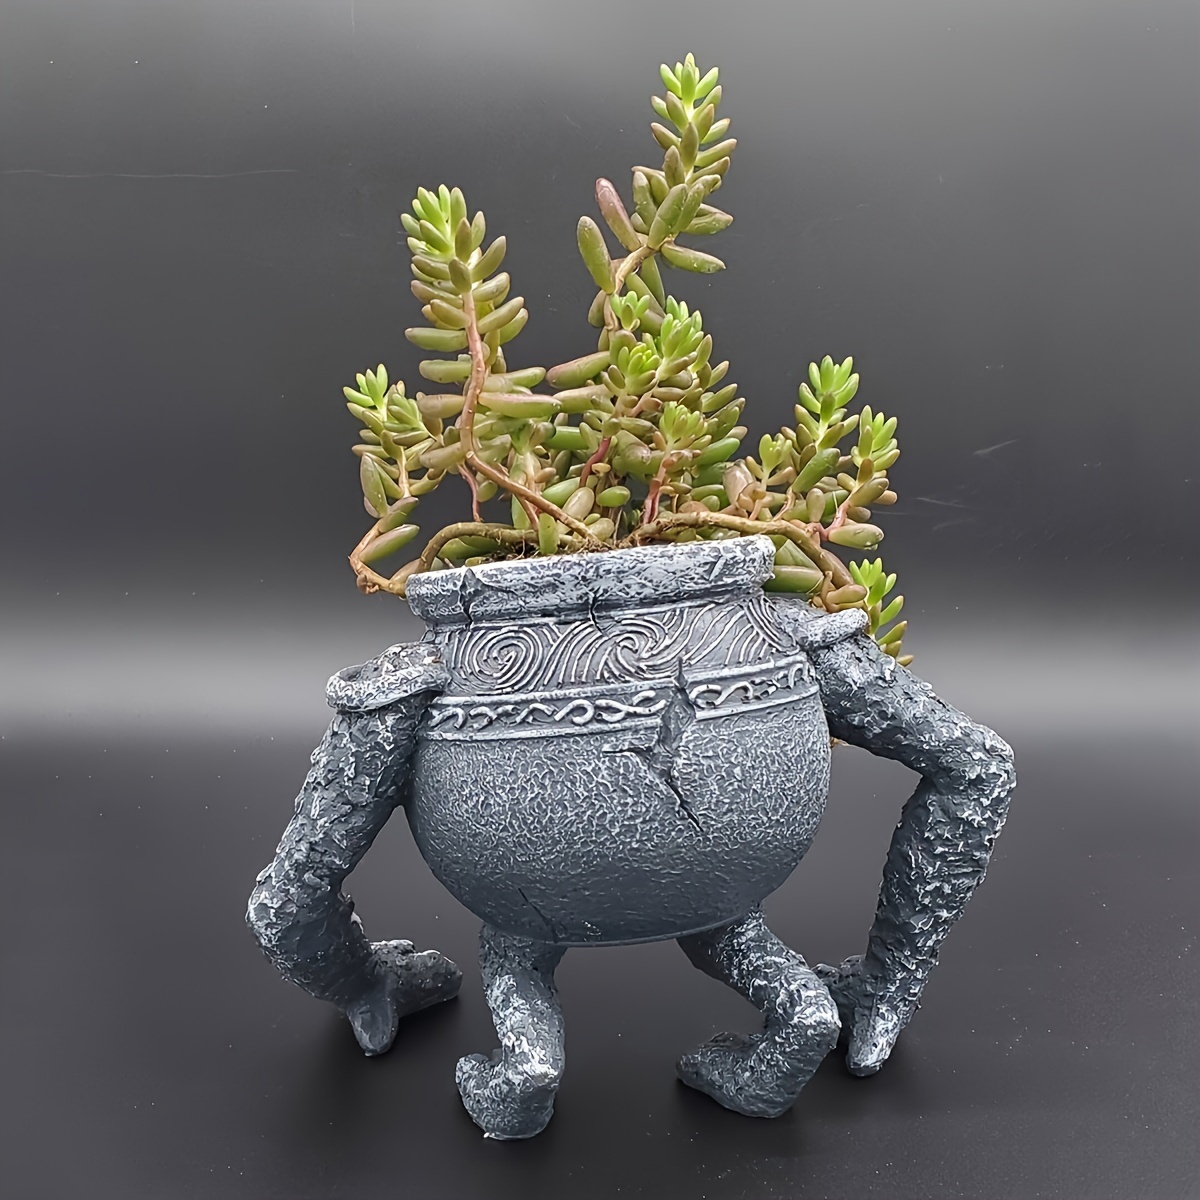 

1pc, Vintage Style Elden Ring Resin Planter, Fantasy Creature Alexandrian Pot Home Decor, Kids Gift, Collectible Flower Pot Ornament (7.67in X 5.31in)